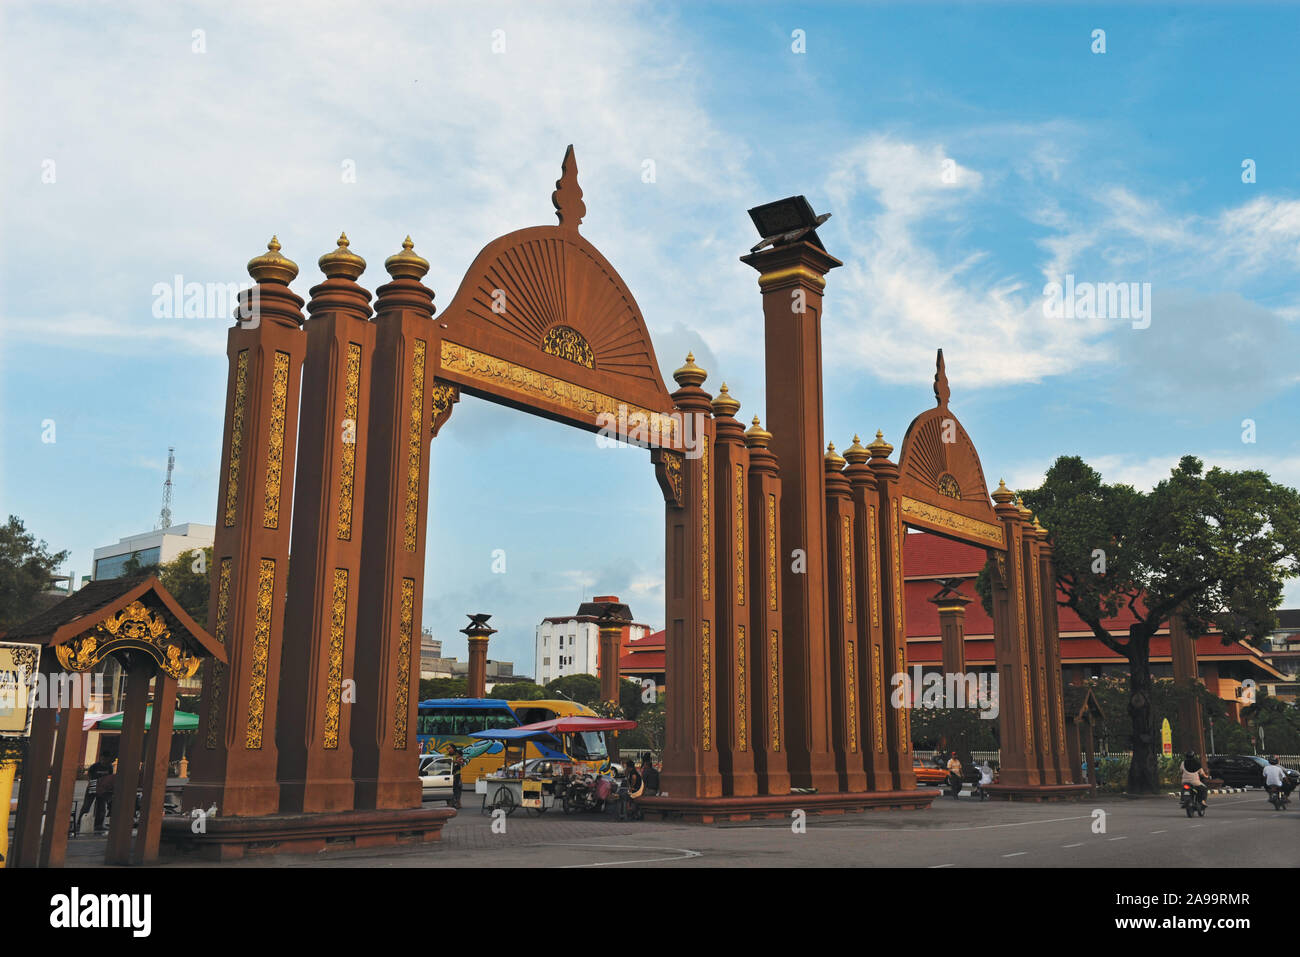 Page 9 - Kota Bharu High Resolution Stock Photography and Images 